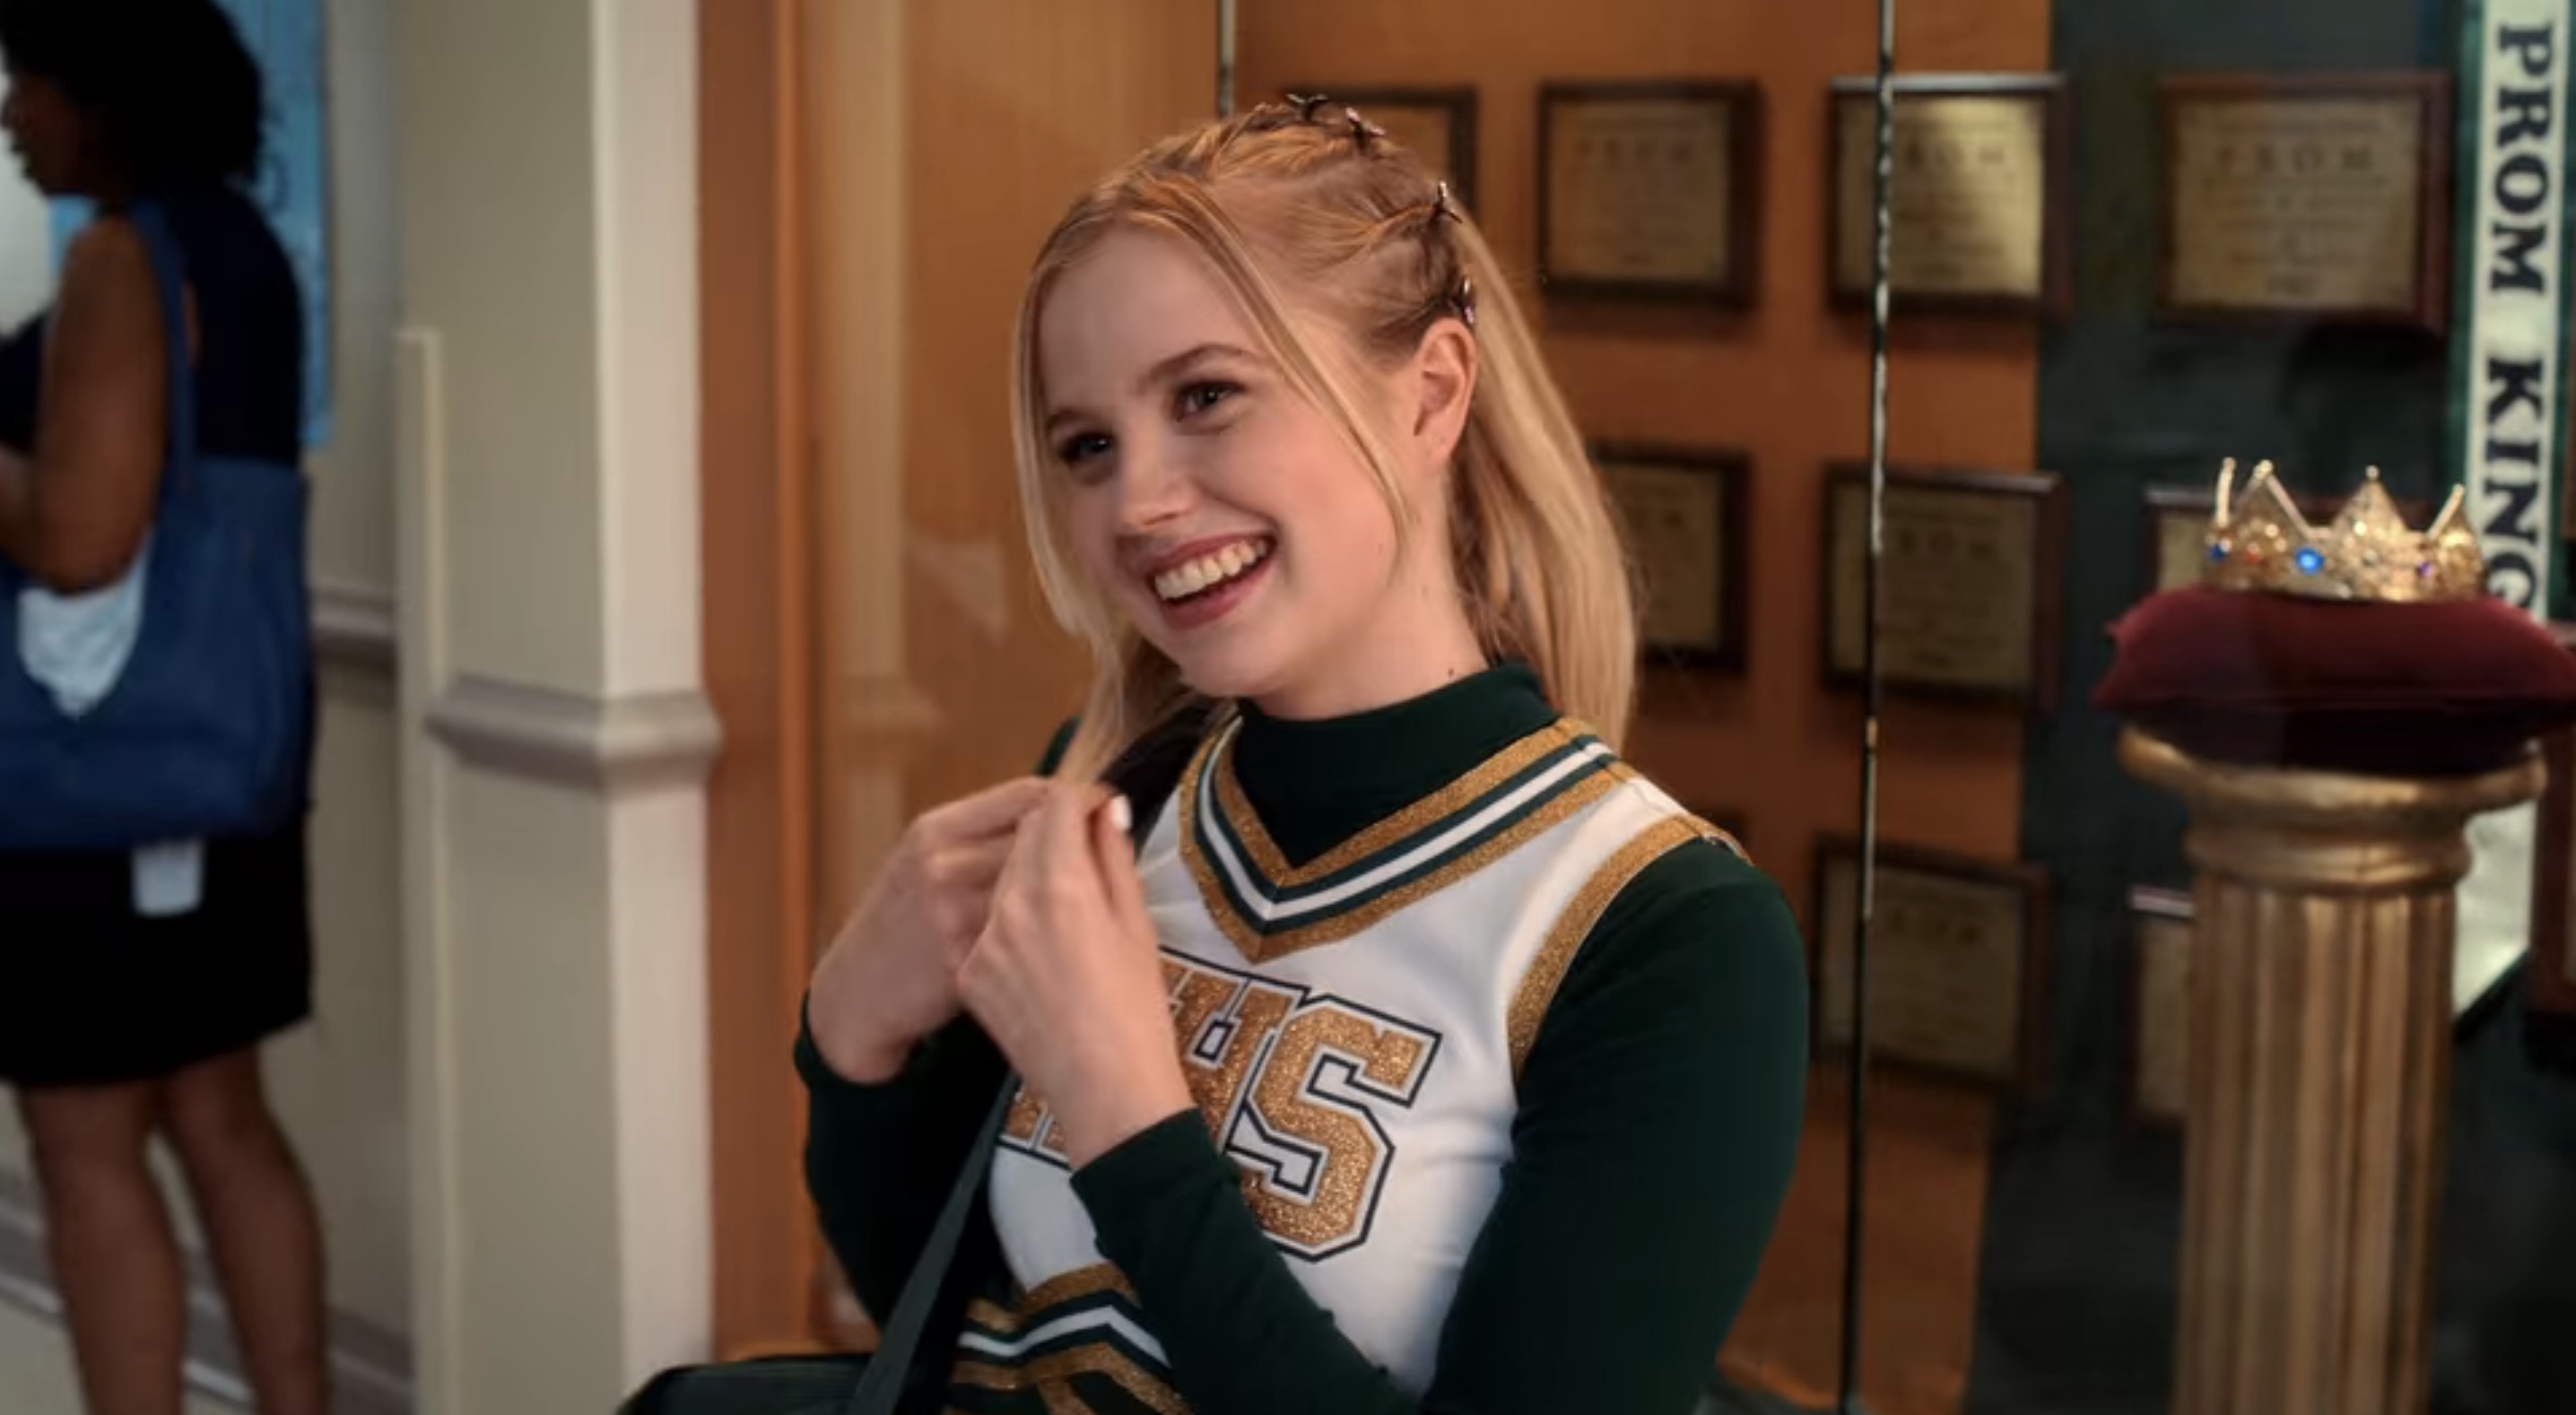 Senior Year Cast on Netflix - Angourie Rice as Young Stephanie Conway